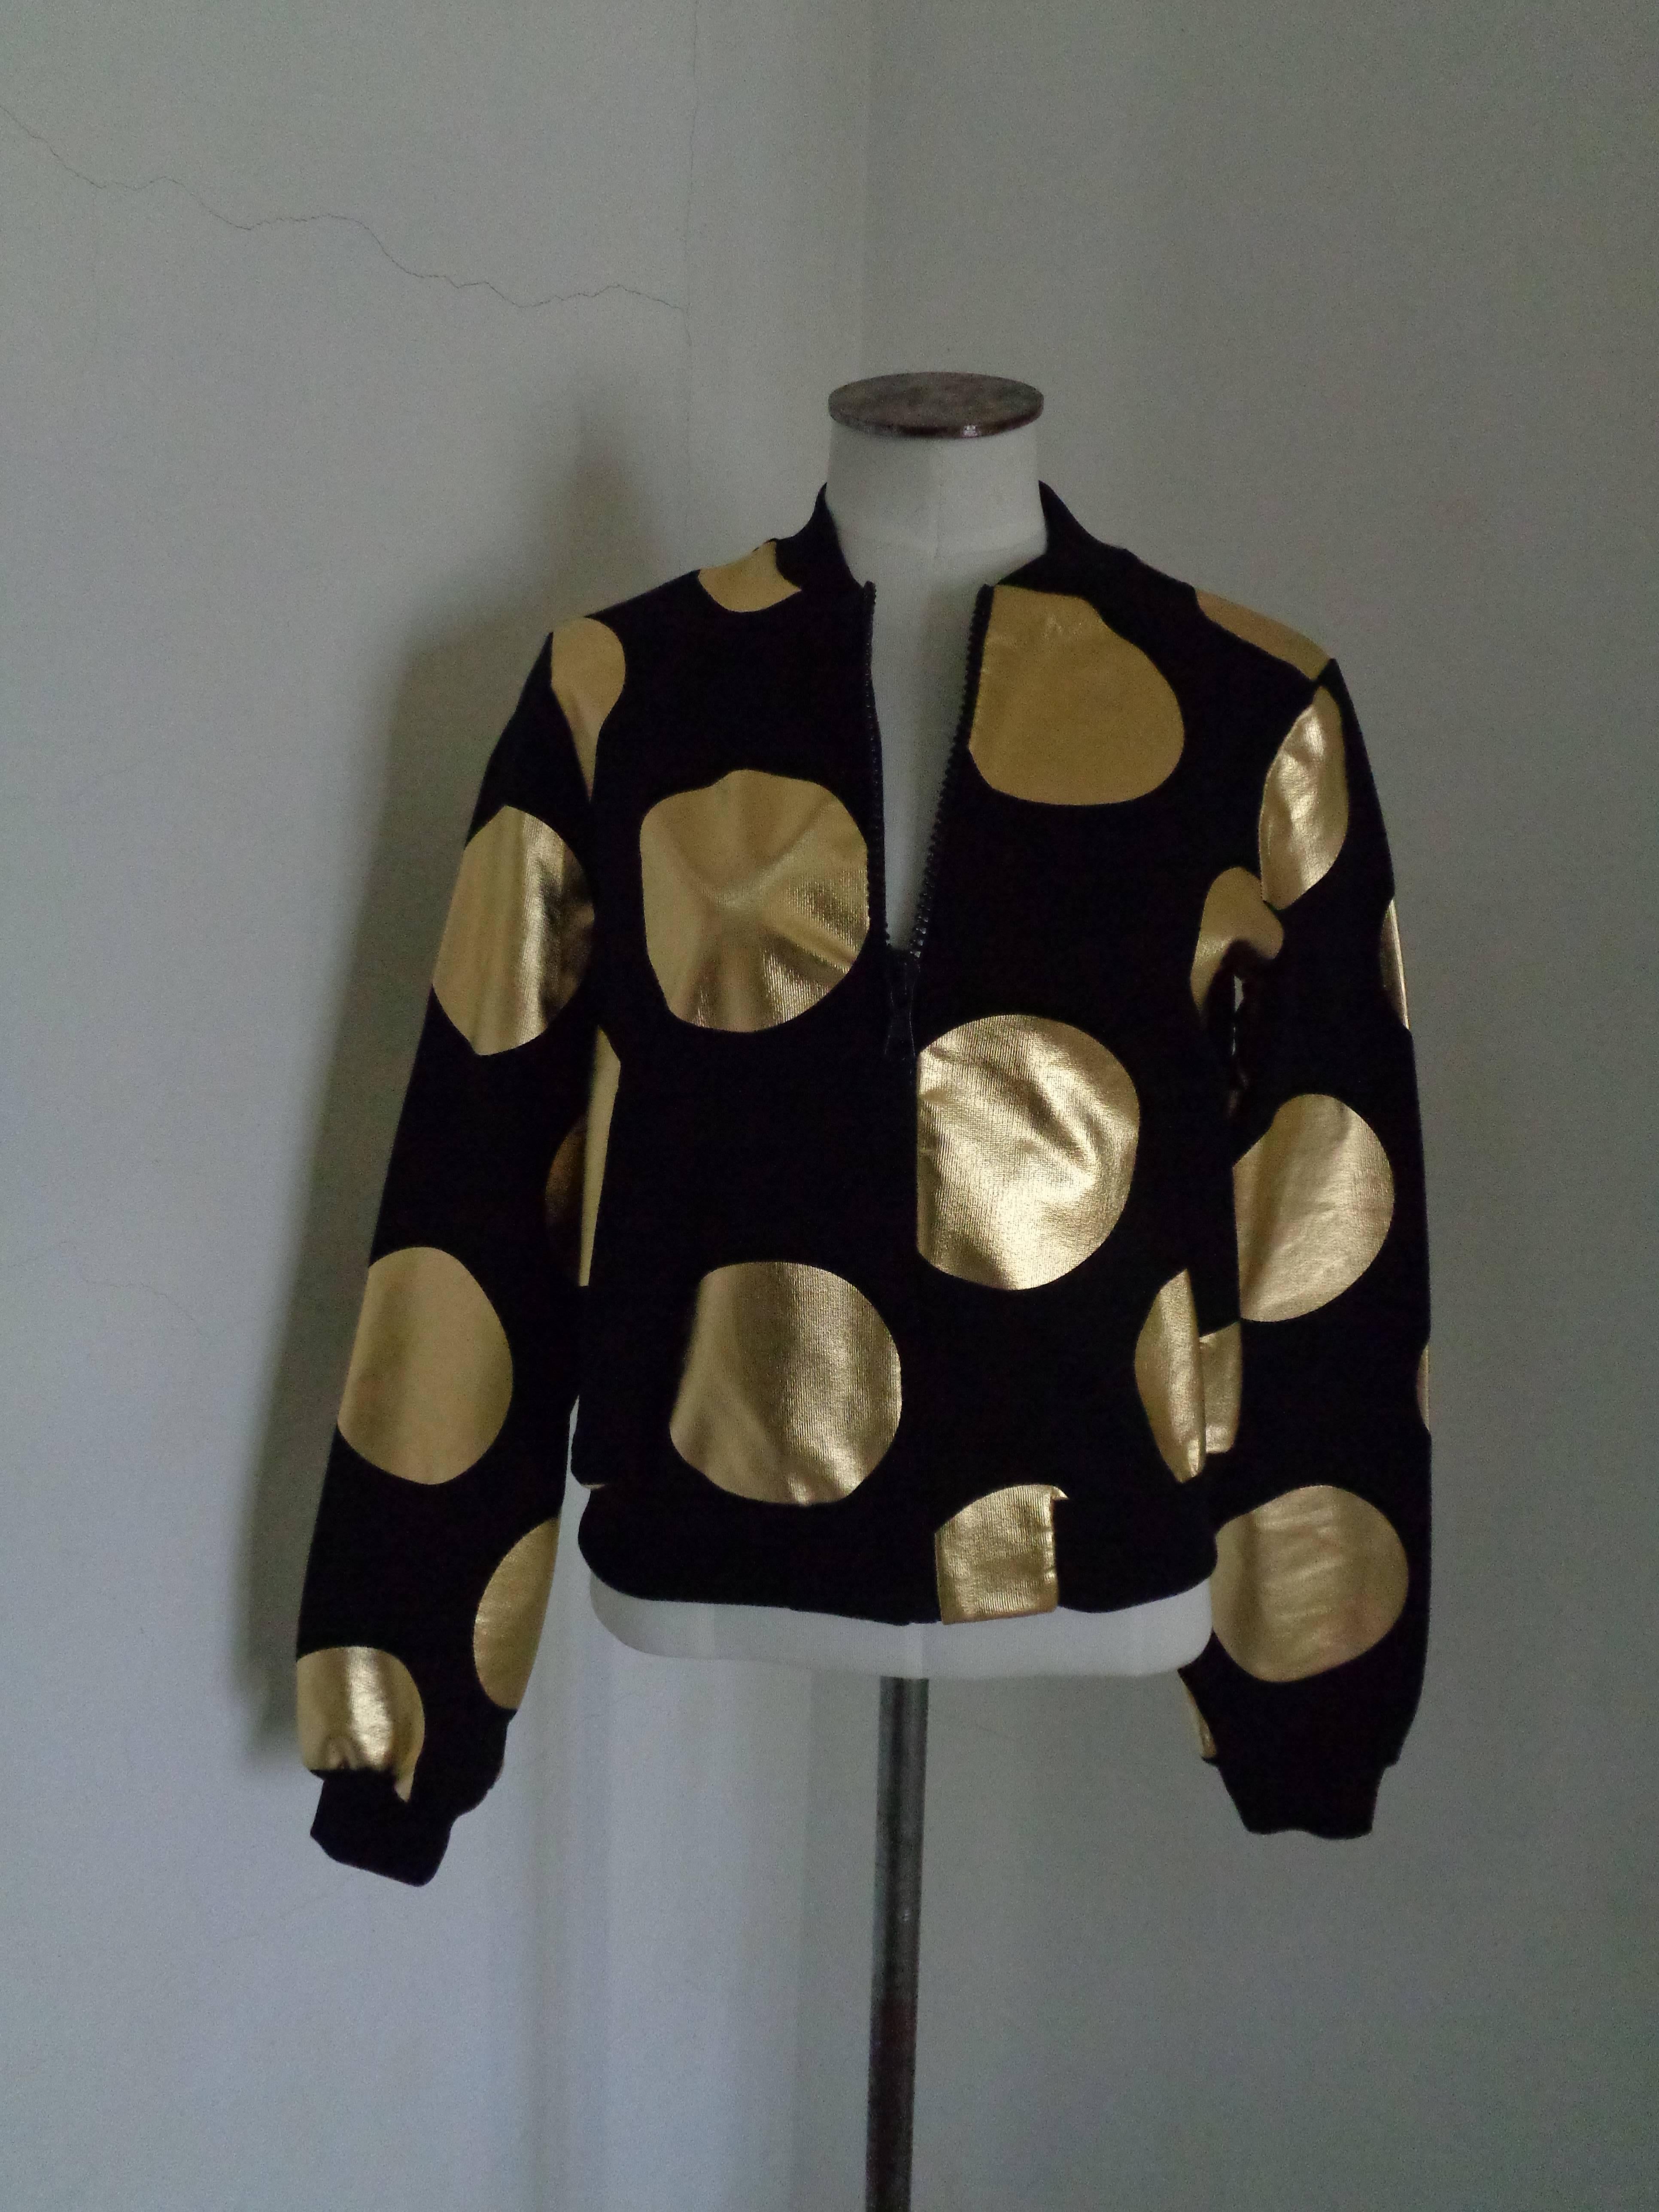 Boutique Moschino Black / Gold Pois Sweater
Composition: Cotton
Size 38